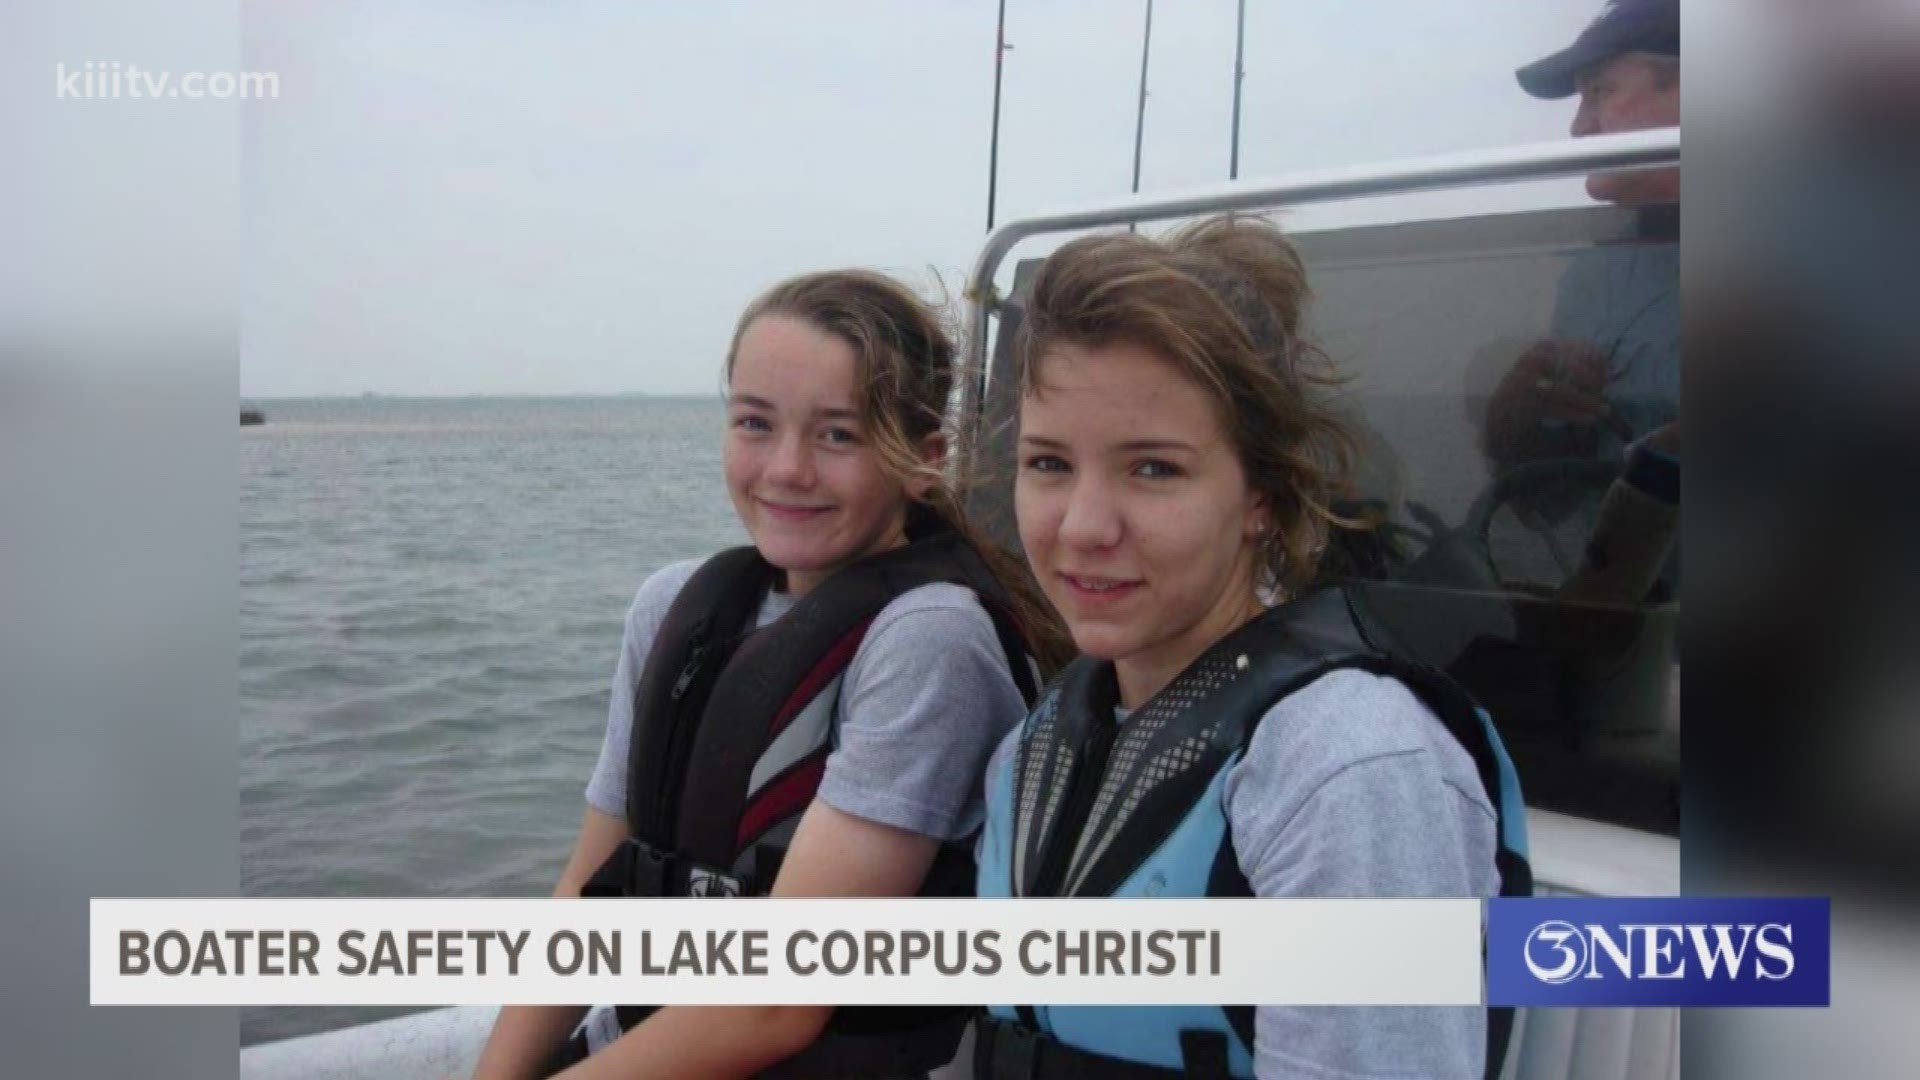 While famlies were enjoying their Labor Day weekend at Lake Corpus Christi, San Patricio County sheriff's deputies were making sure they're staying safe and notifying people about a new law affecting boaters and jet skiers.